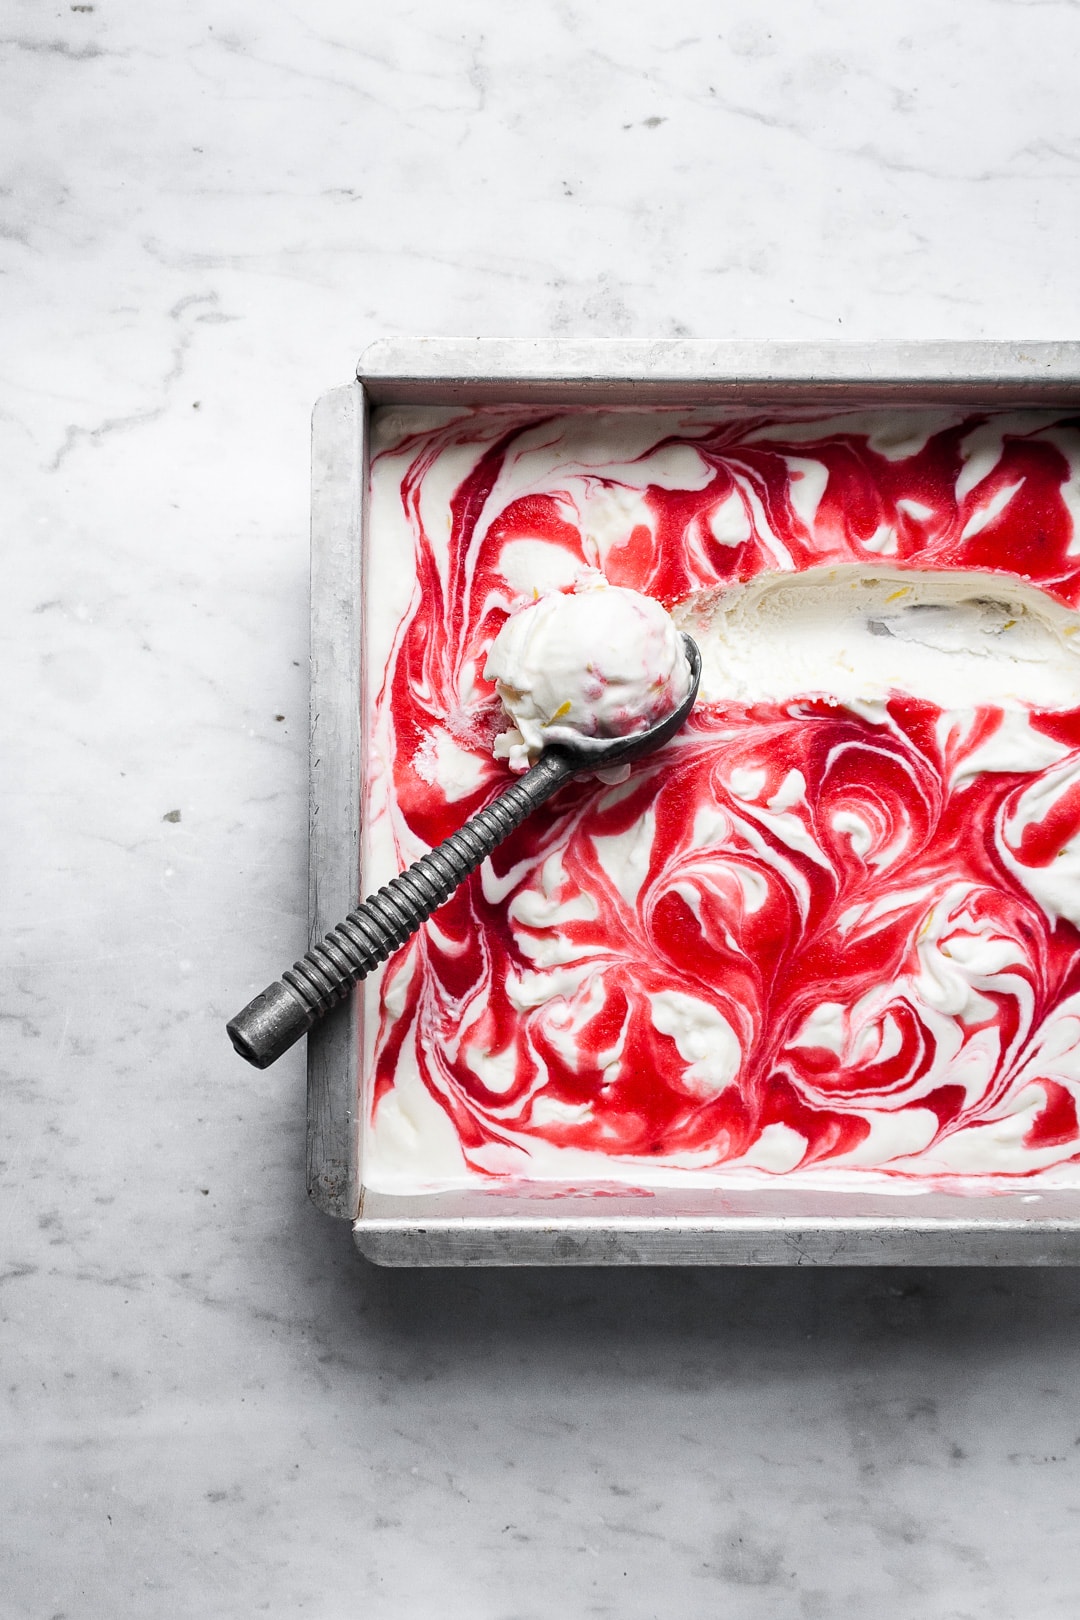 Square metal pan with red and white swirled ice cream and the marks of a scoop being removed with a vintage ice cream scoop